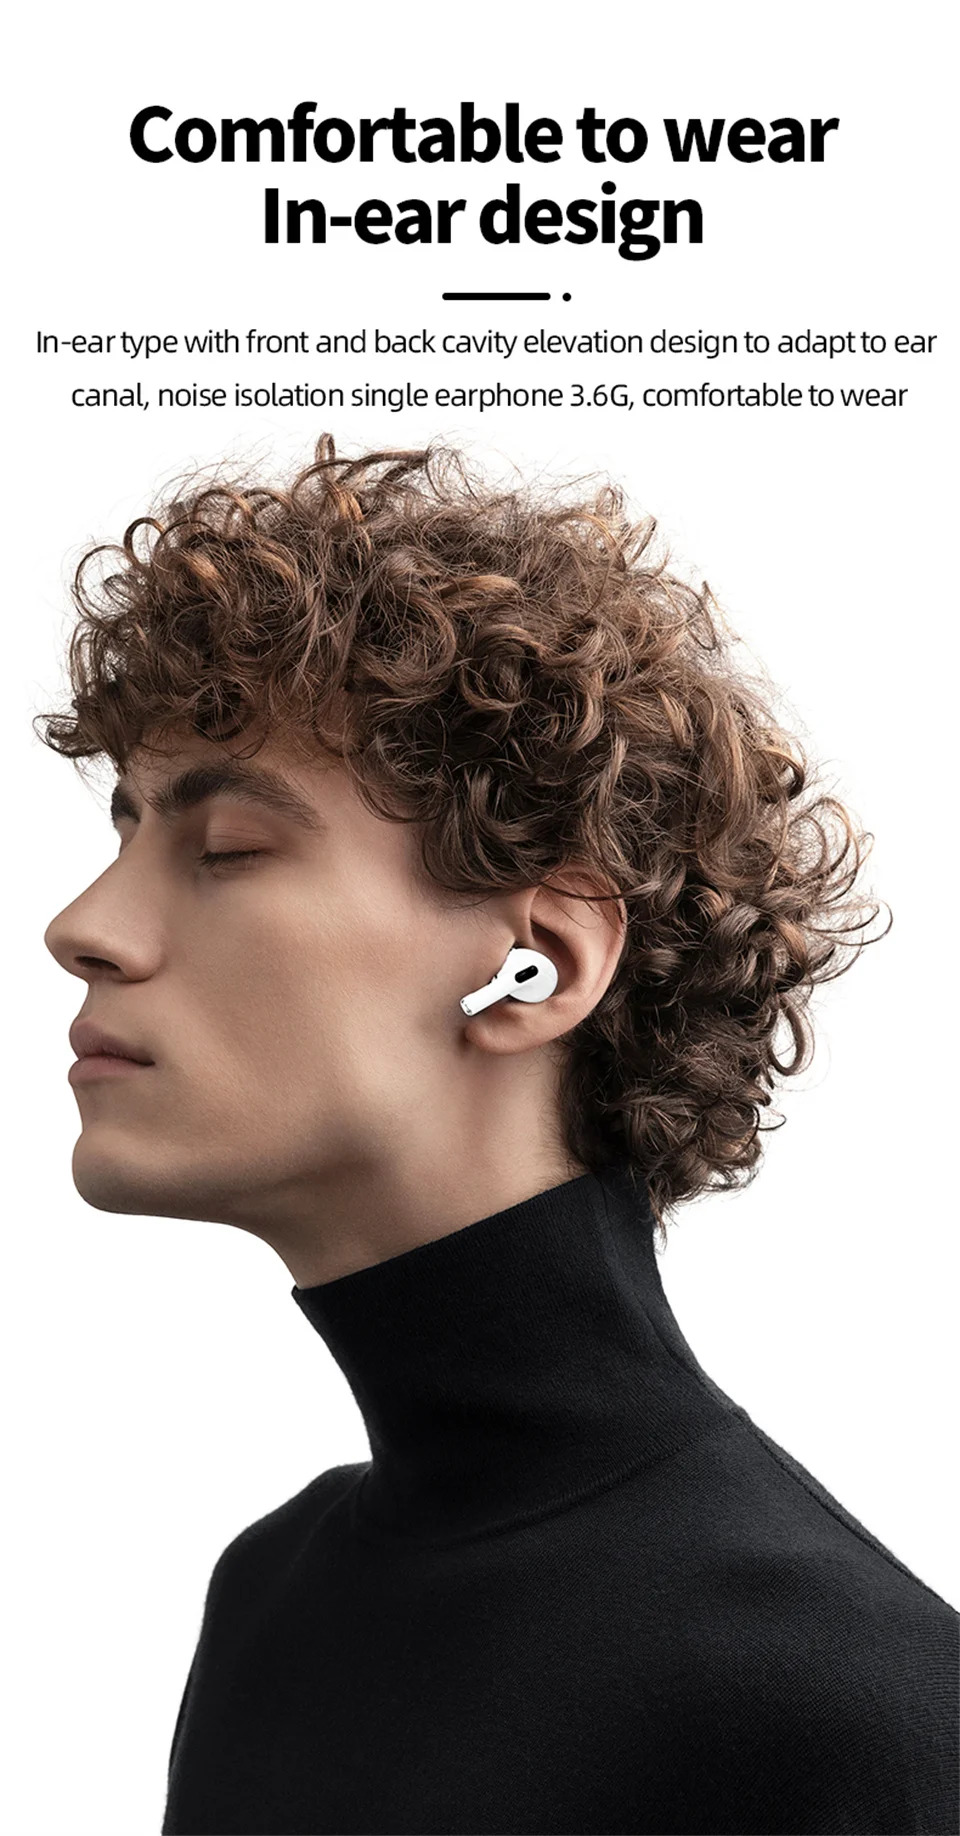 A9-Pro-Airpods-With-Display-modernwears-pk-price-pakistan07